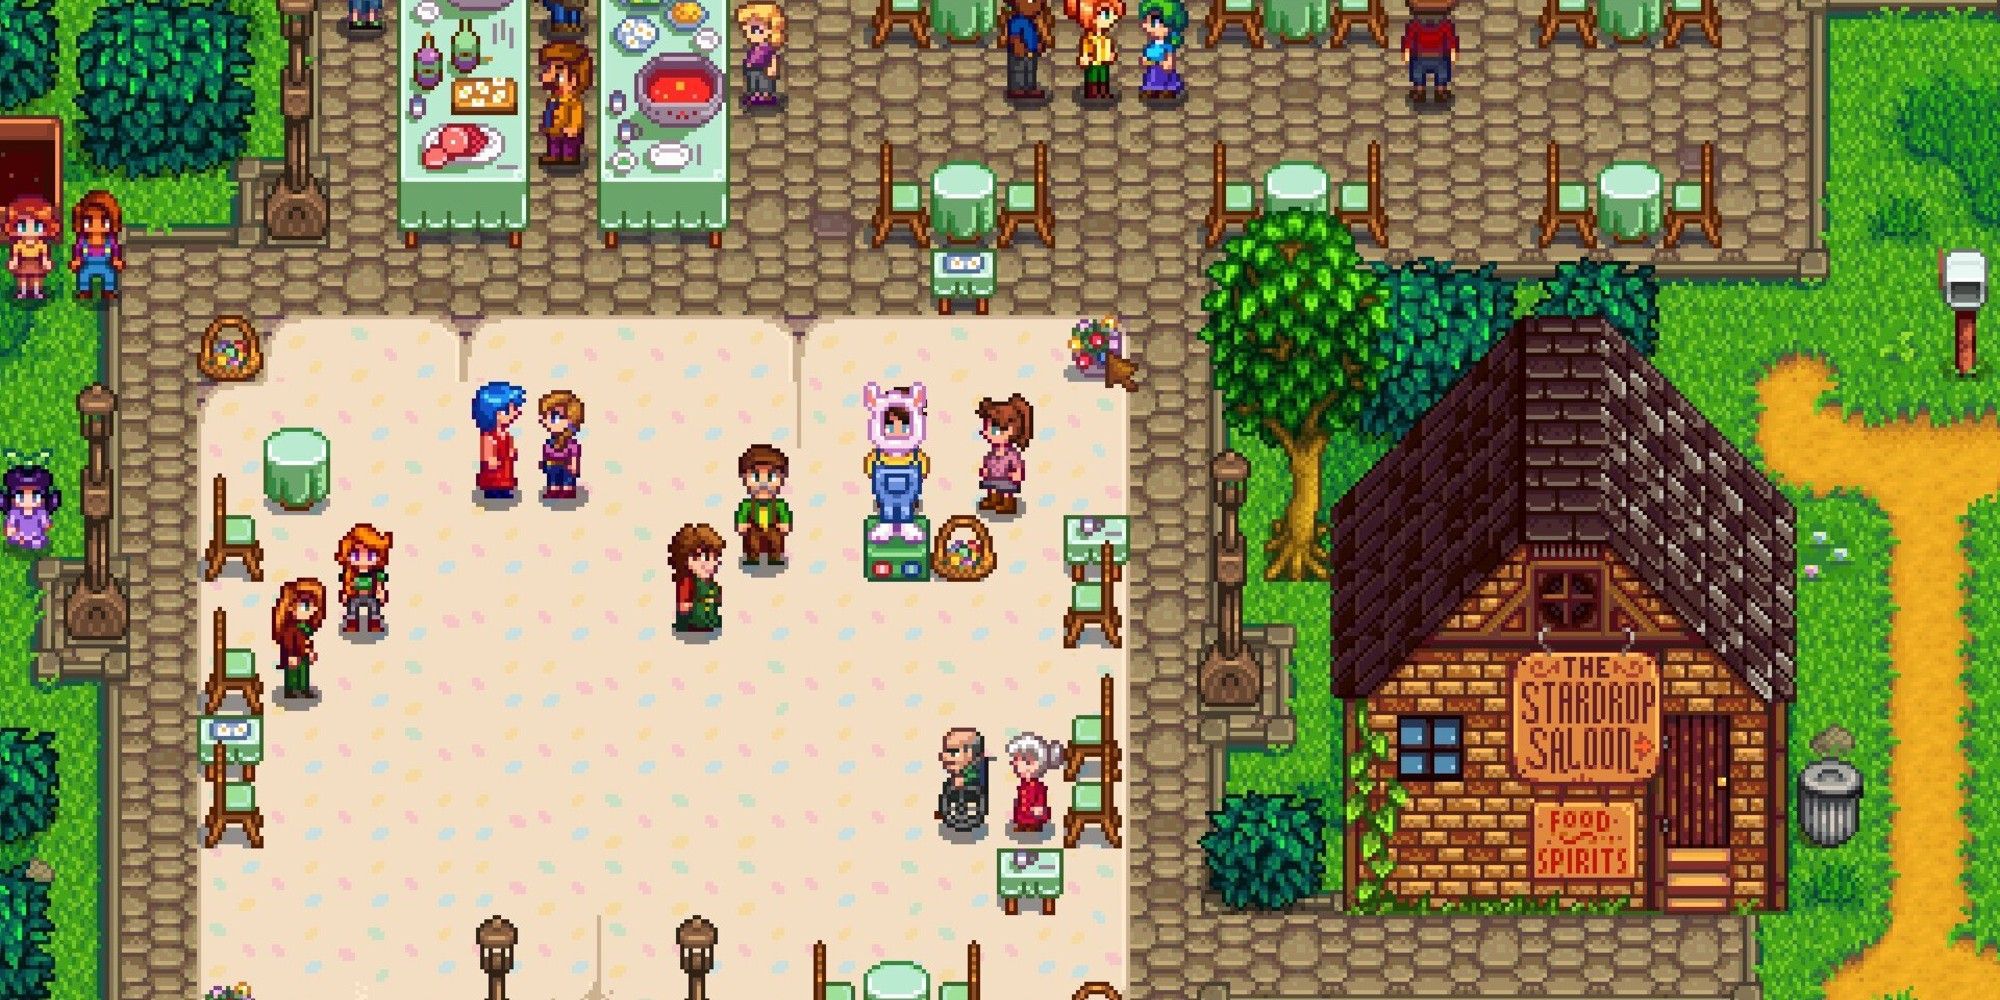 player standing at egg festival in bunny standee